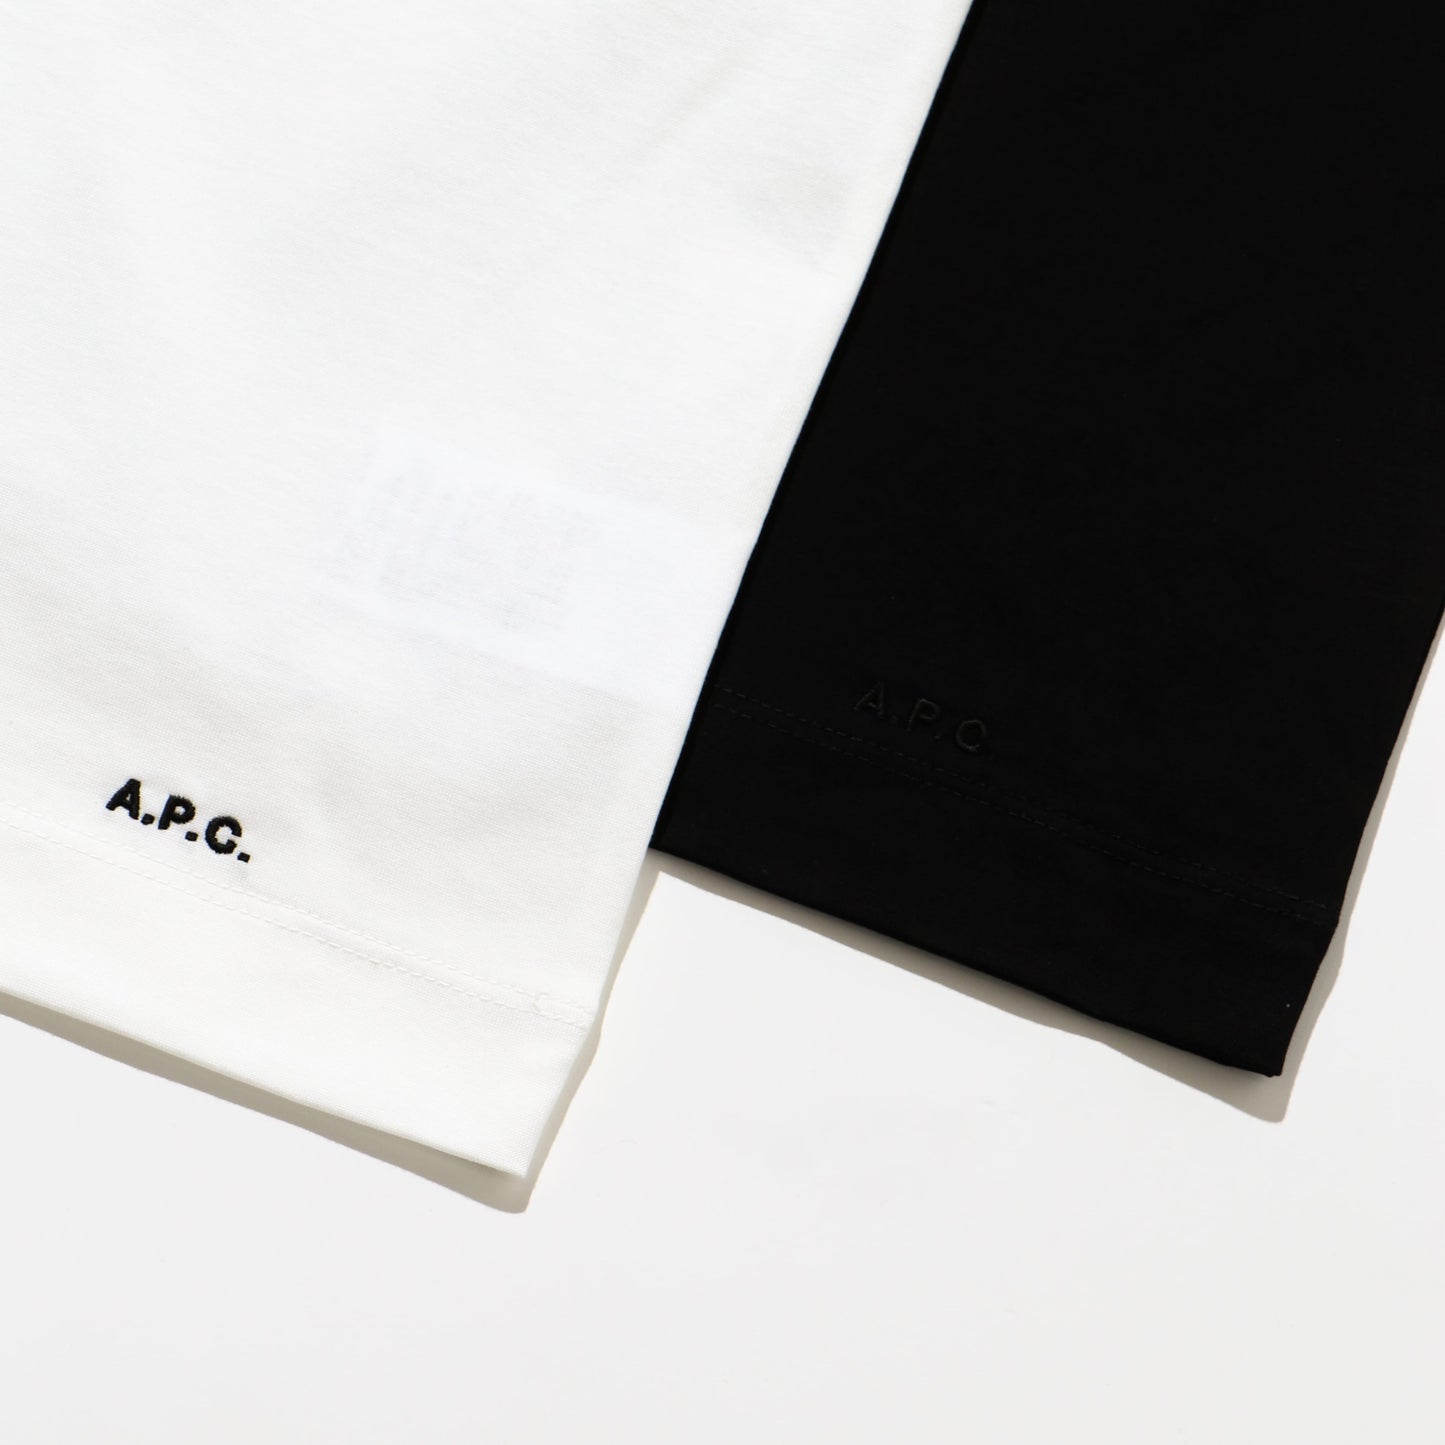 PACKAGE-T WHITE×BLACK